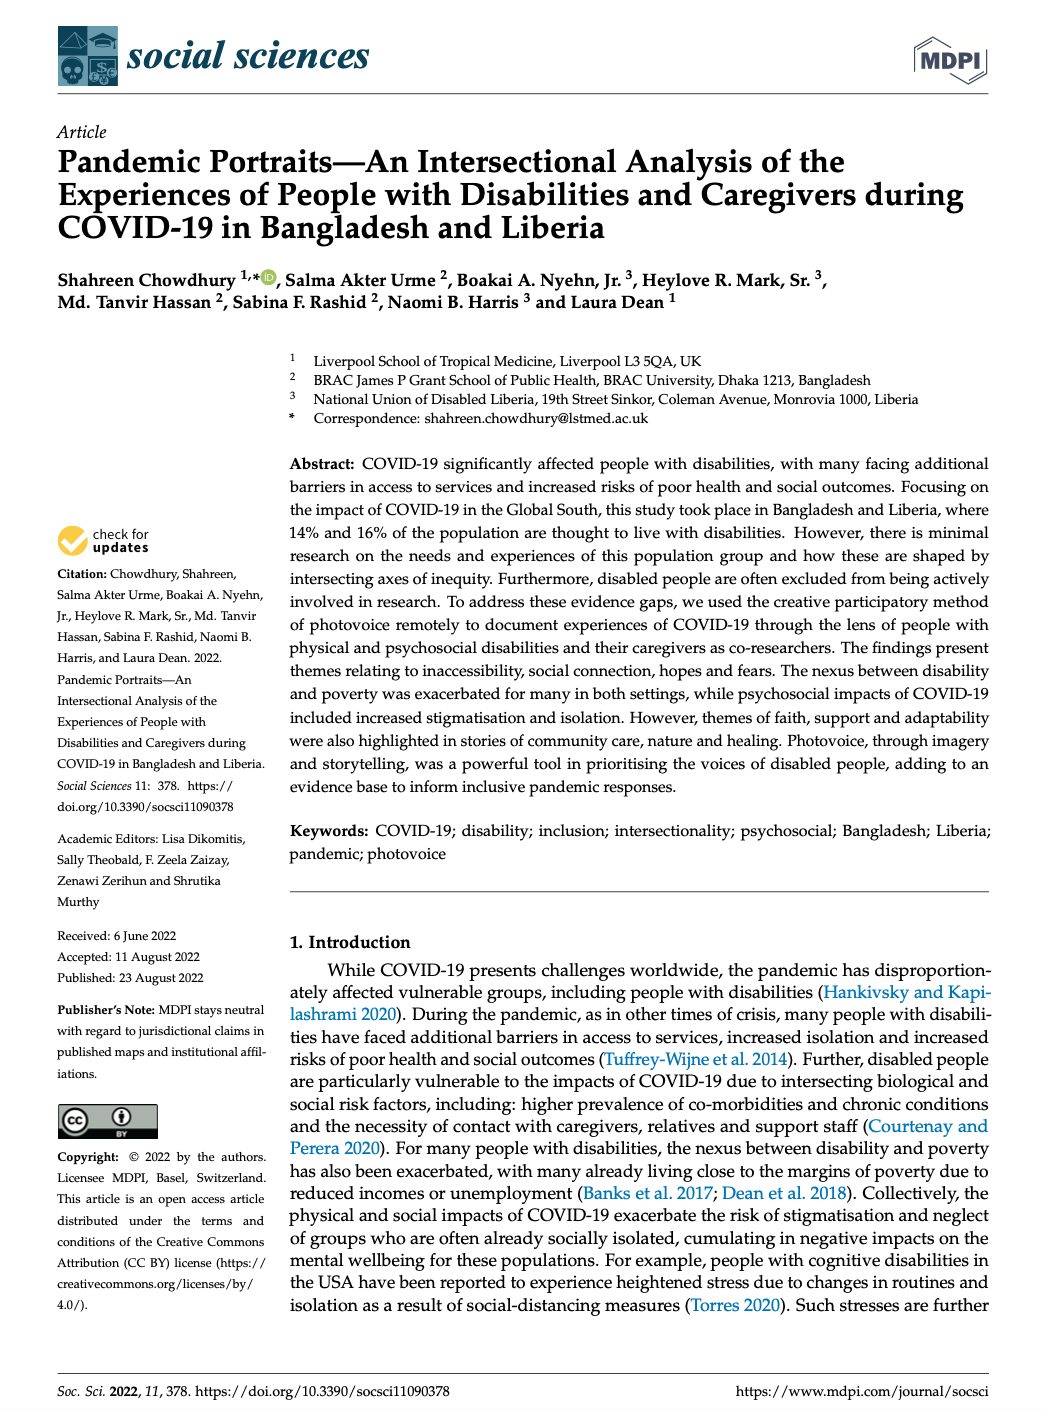 Pandemic Portraits—An Intersectional Analysis of the Experiences of People with Disabilities and Caregivers during COVID-19 in Bangladesh and Liberia